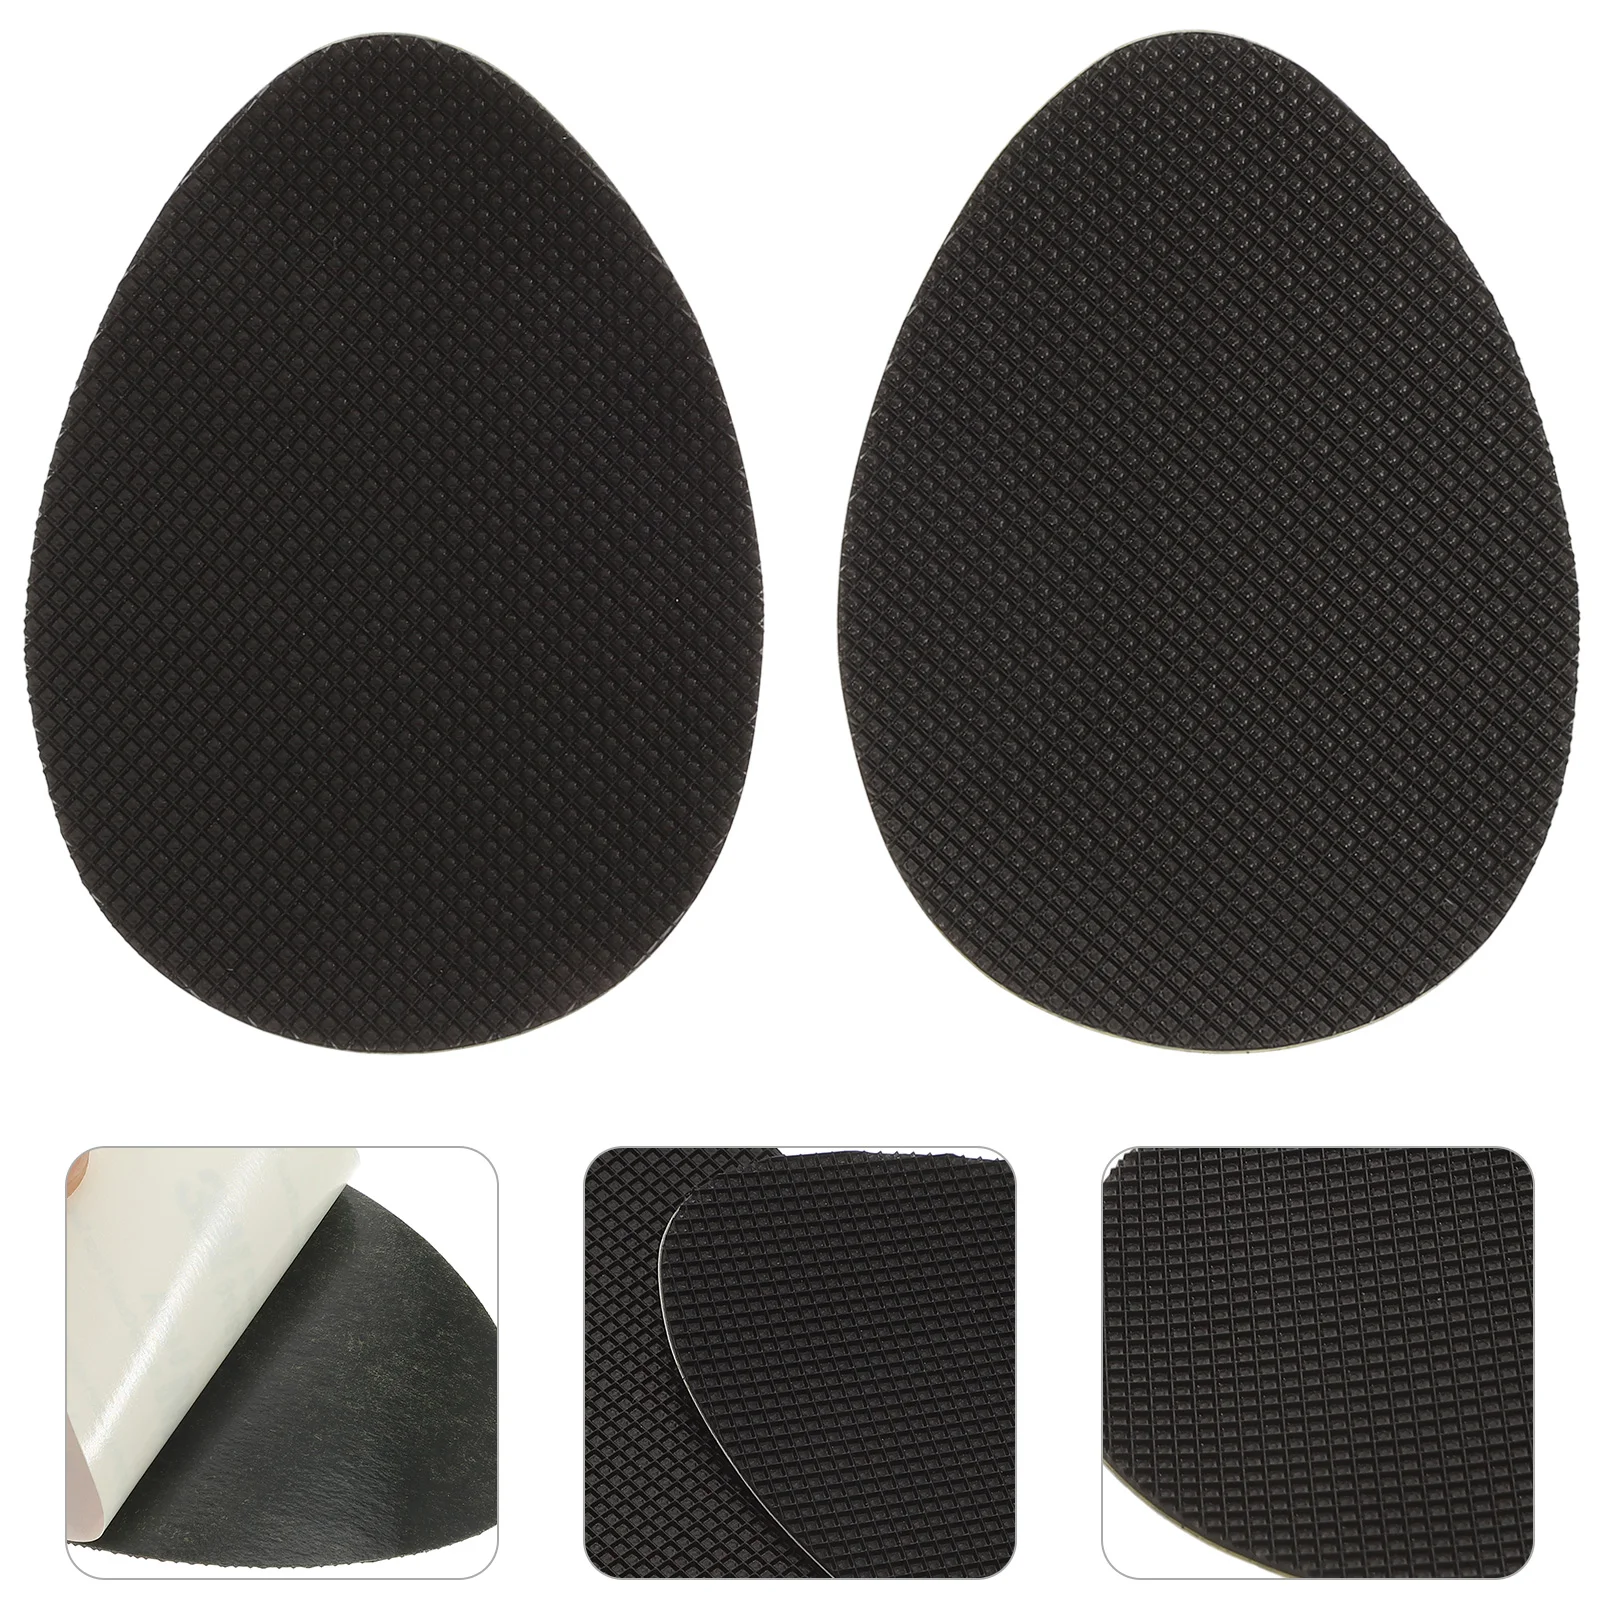 

6 Pairs Shoe Heel Protectors Self-adhesive Sole Insole Anti-slip Pads Non-slip Grips